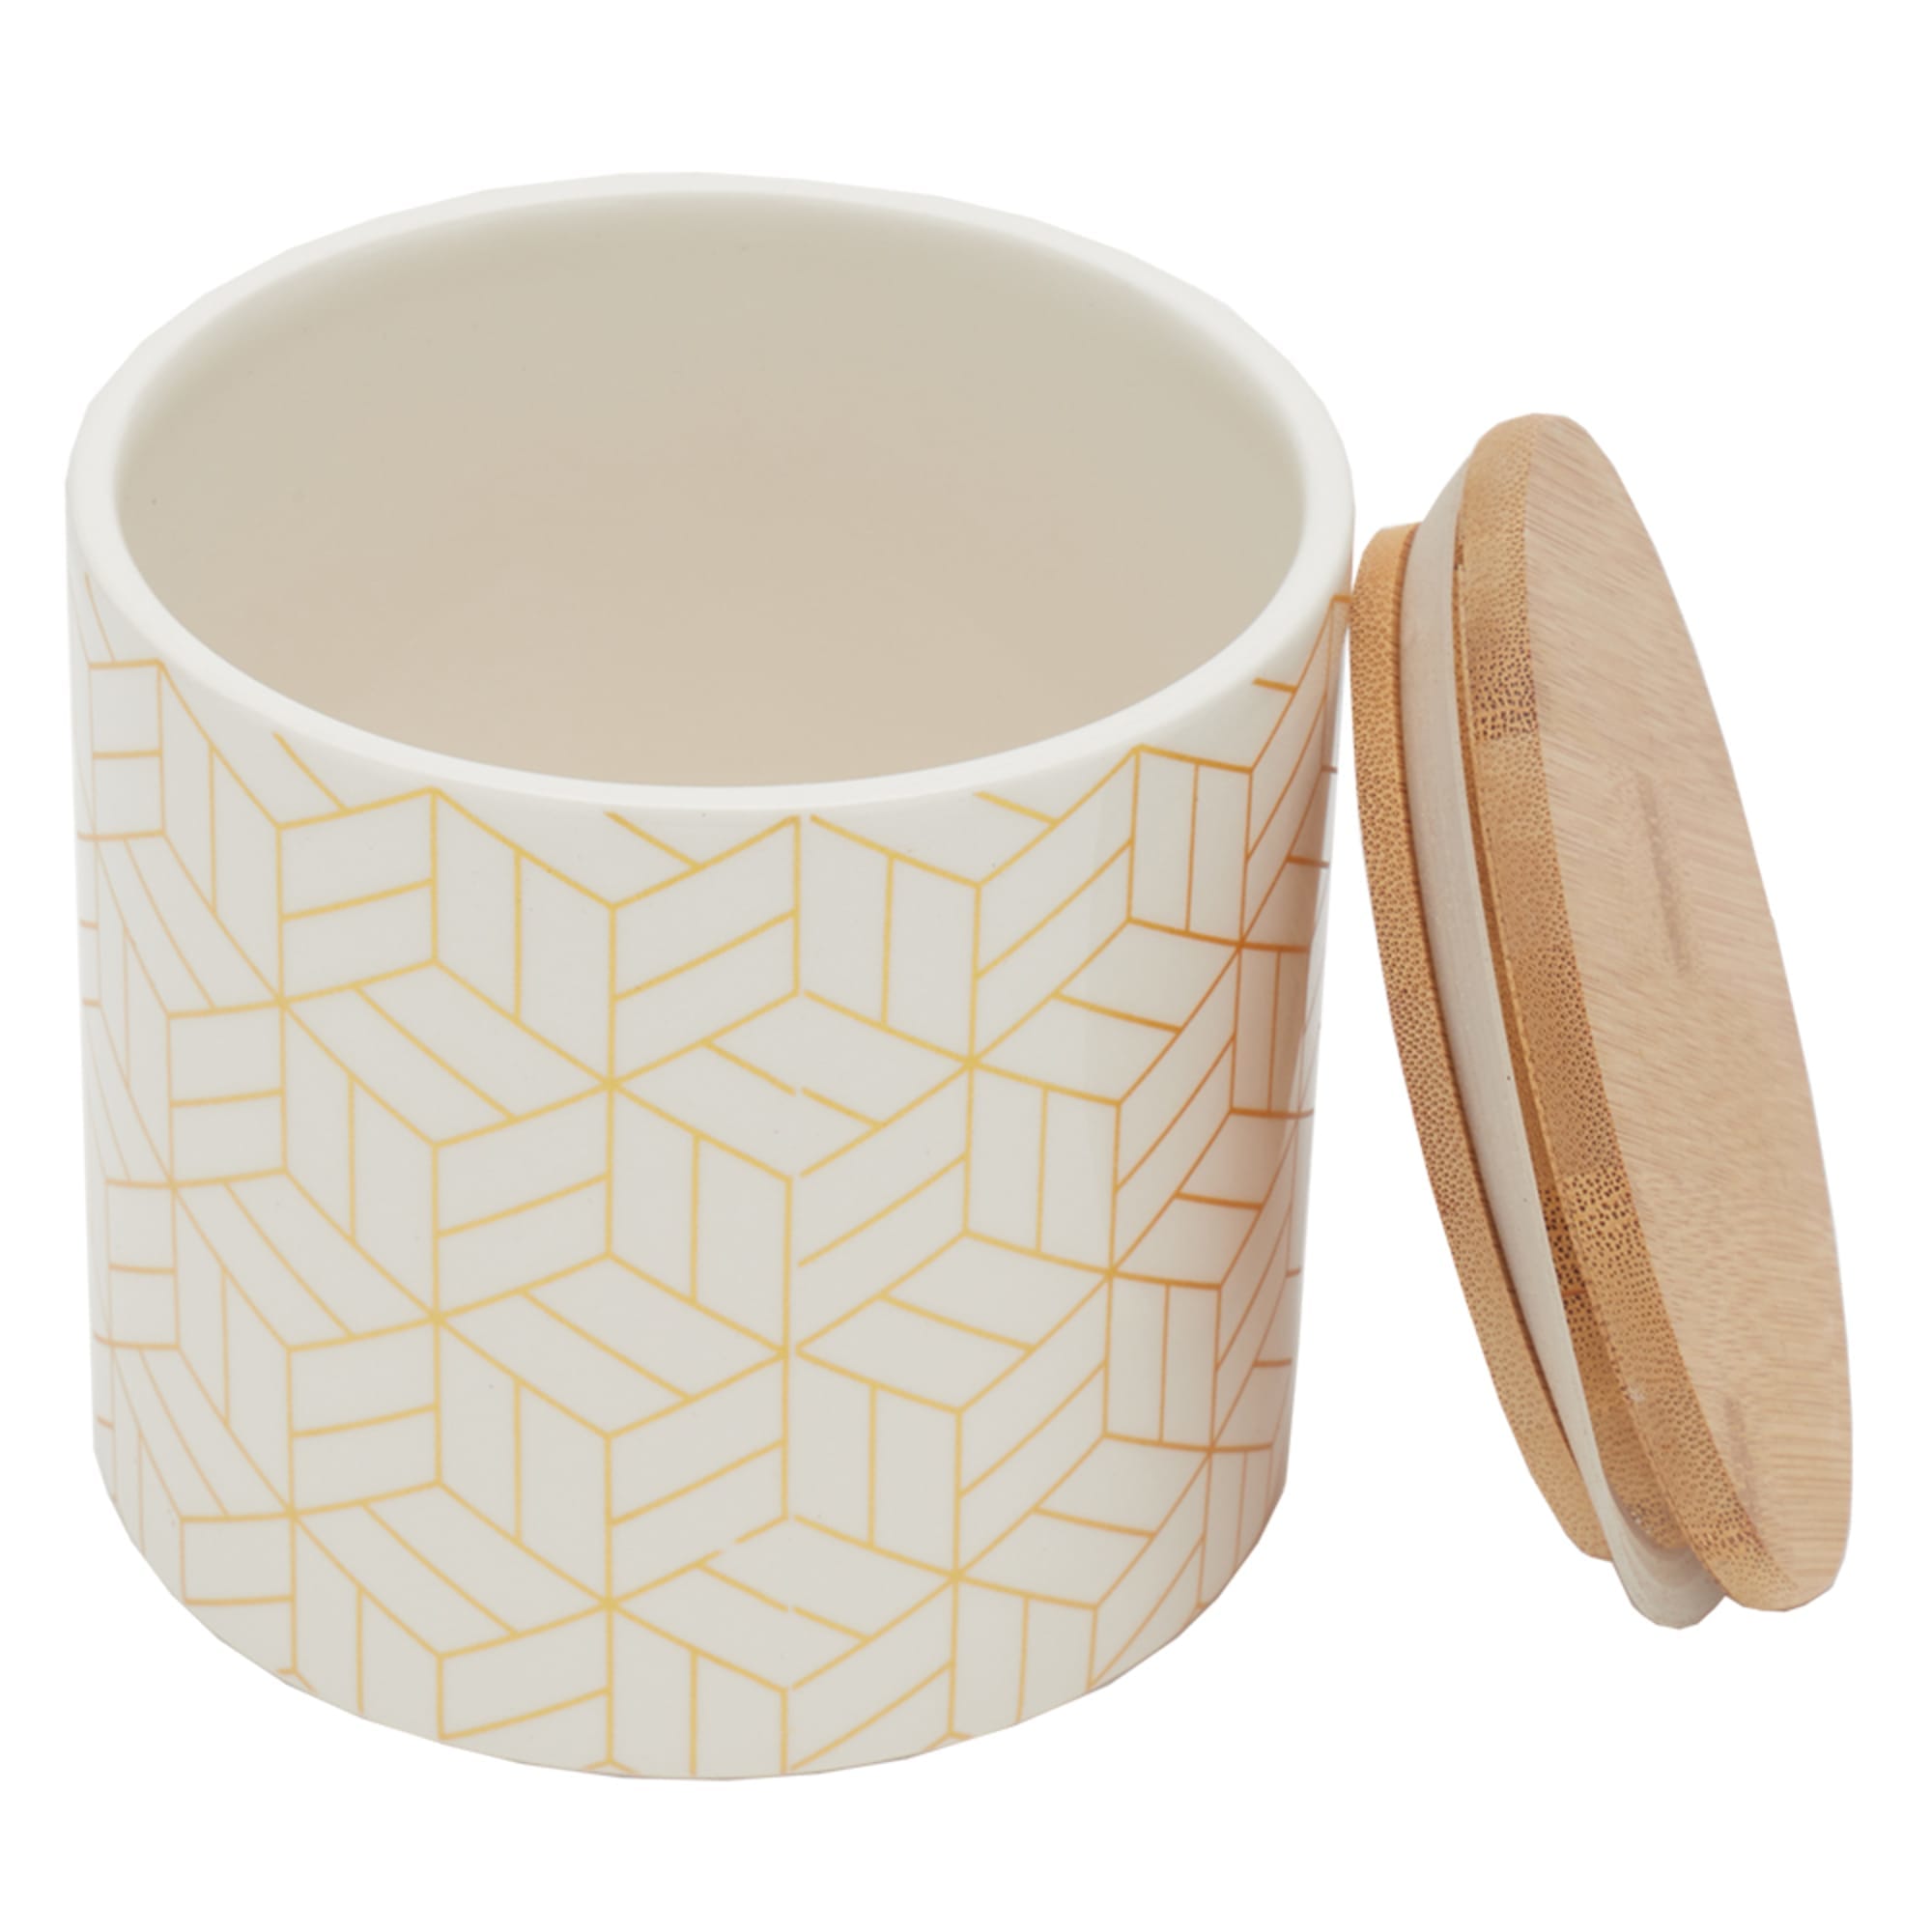 Home Basics Cubix Small Ceramic Canister with Bamboo Top $5.00 EACH, CASE PACK OF 12